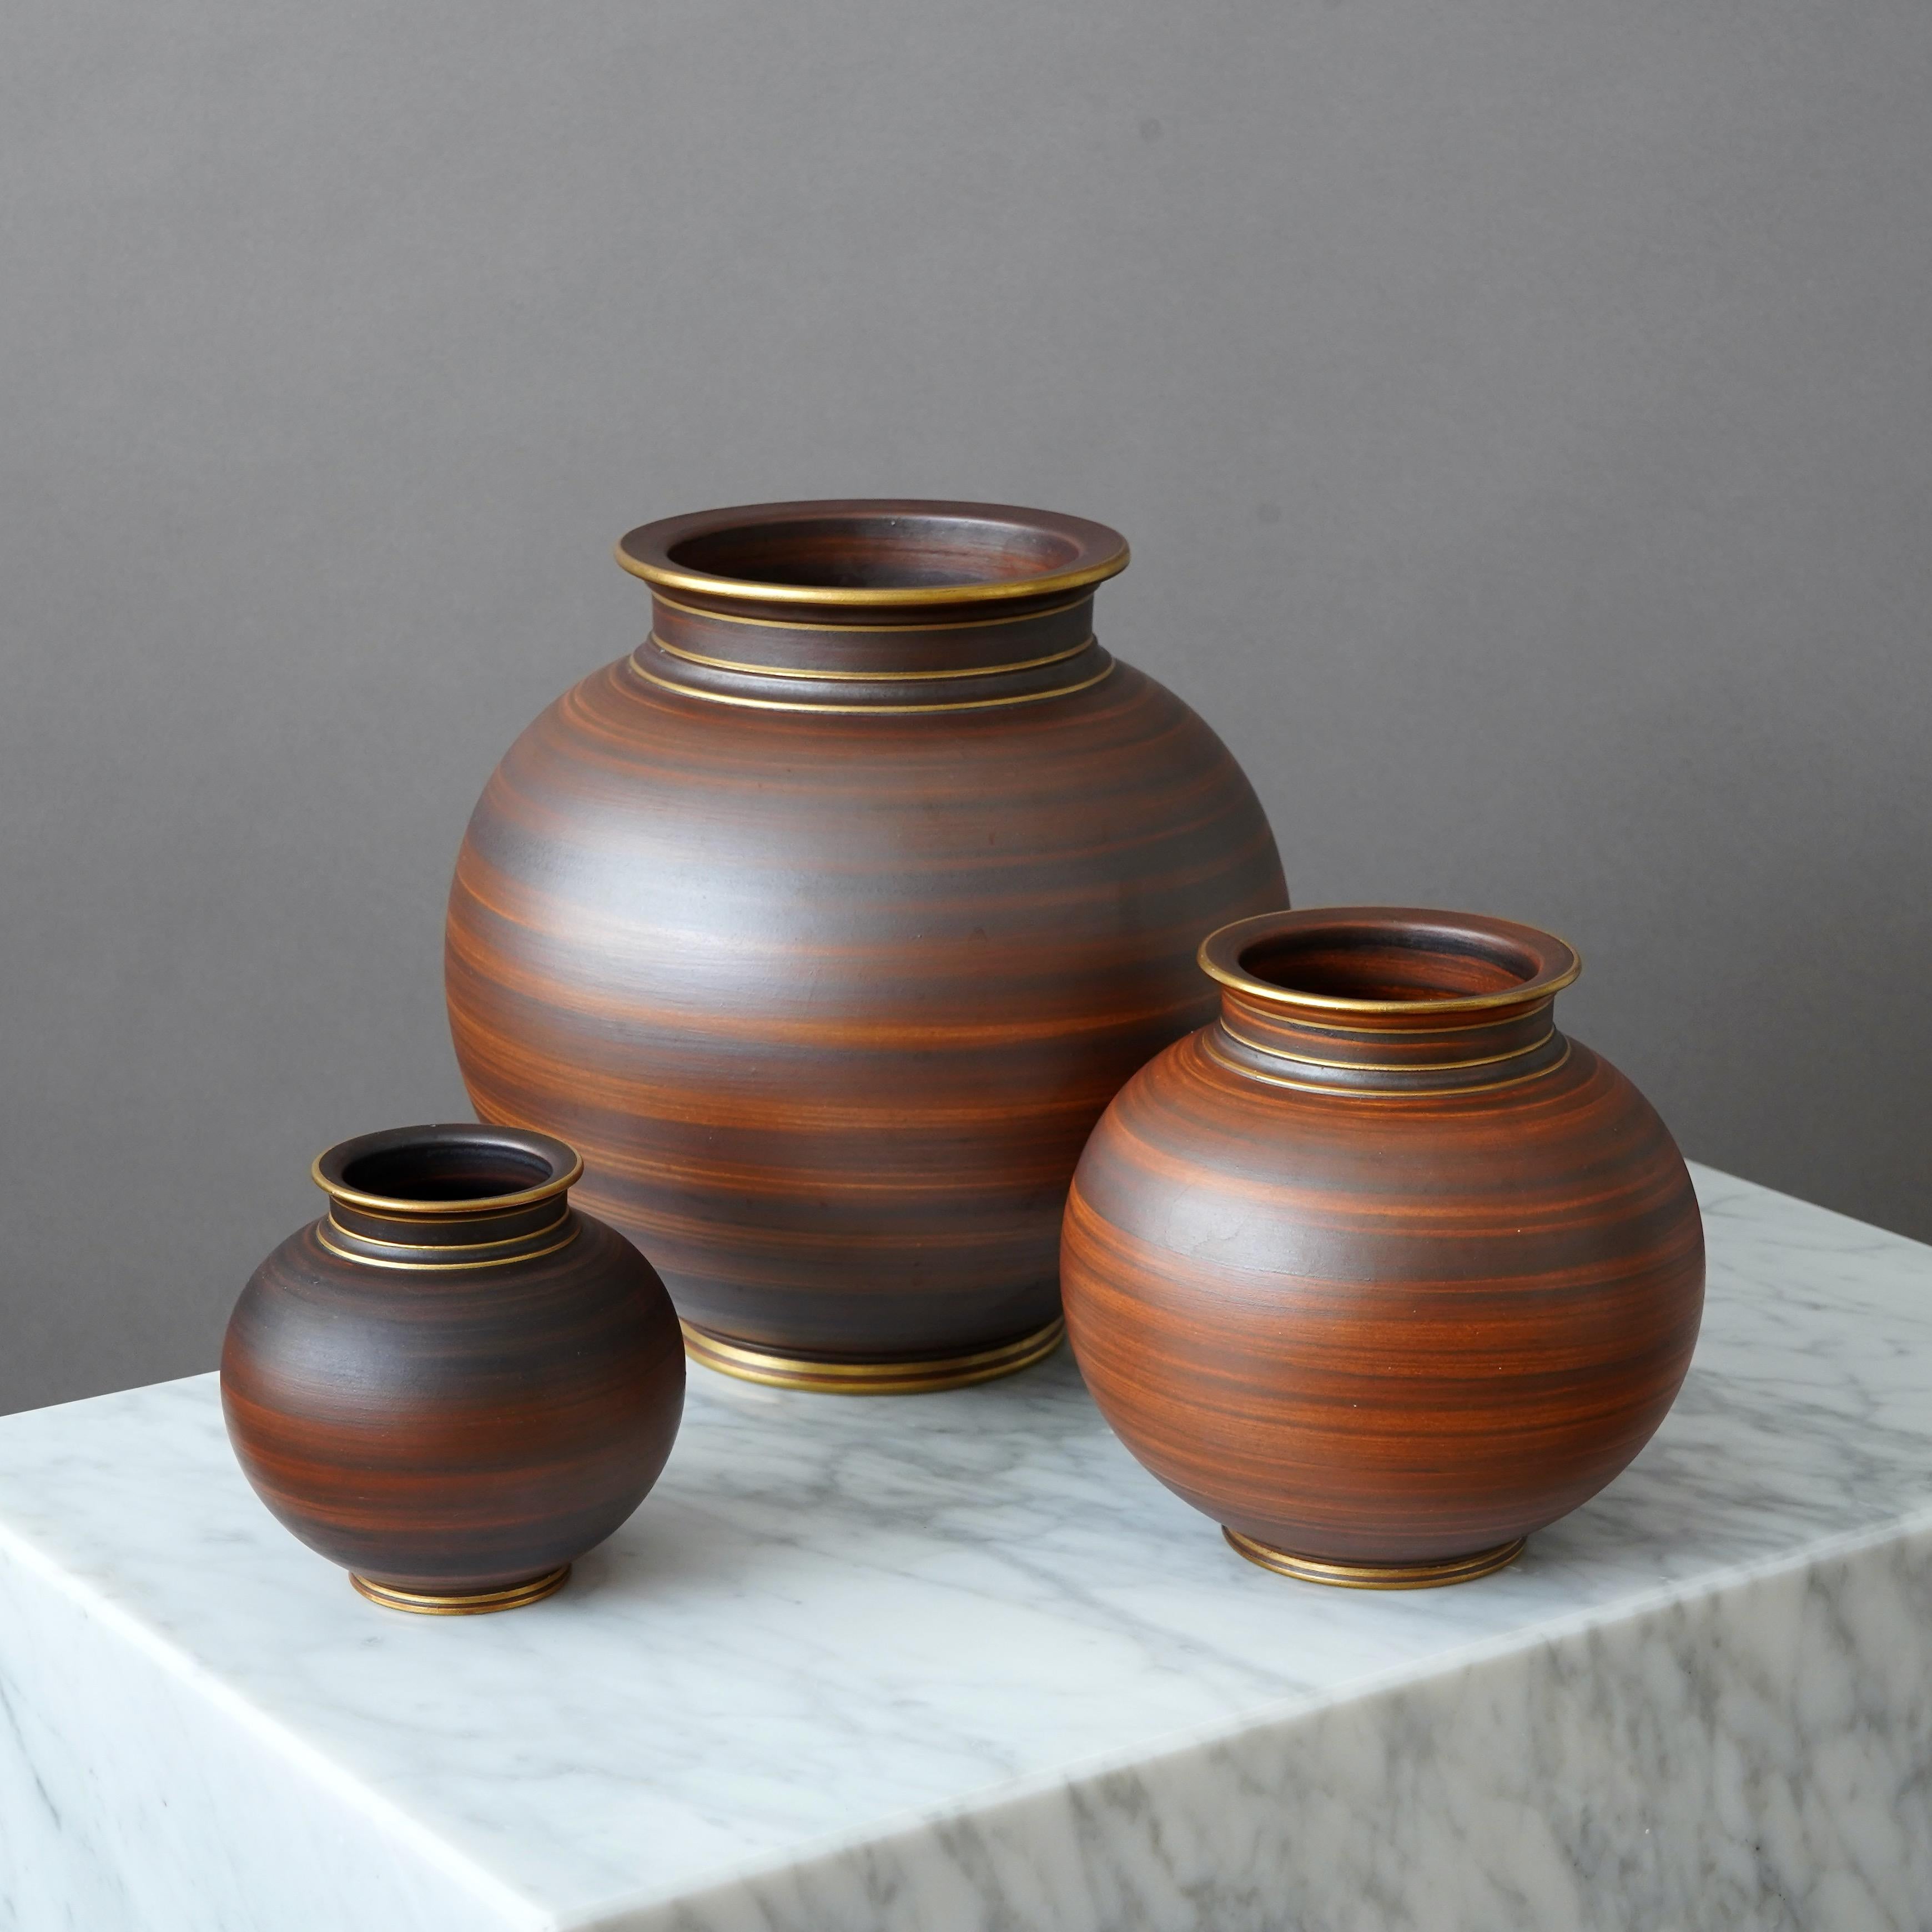 Set of 3 stoneware art deco vases with beautiful brown glaze. Foot and mouth detailed in gold.
Designed by Gunnar Nylund for ALP (Lidköpings Porslinsfabrik), Sweden, 1930s.

Excellent condition.
Stamped 'ALP', 'Modell Nylund', 'Lidköping, SWEDEN'